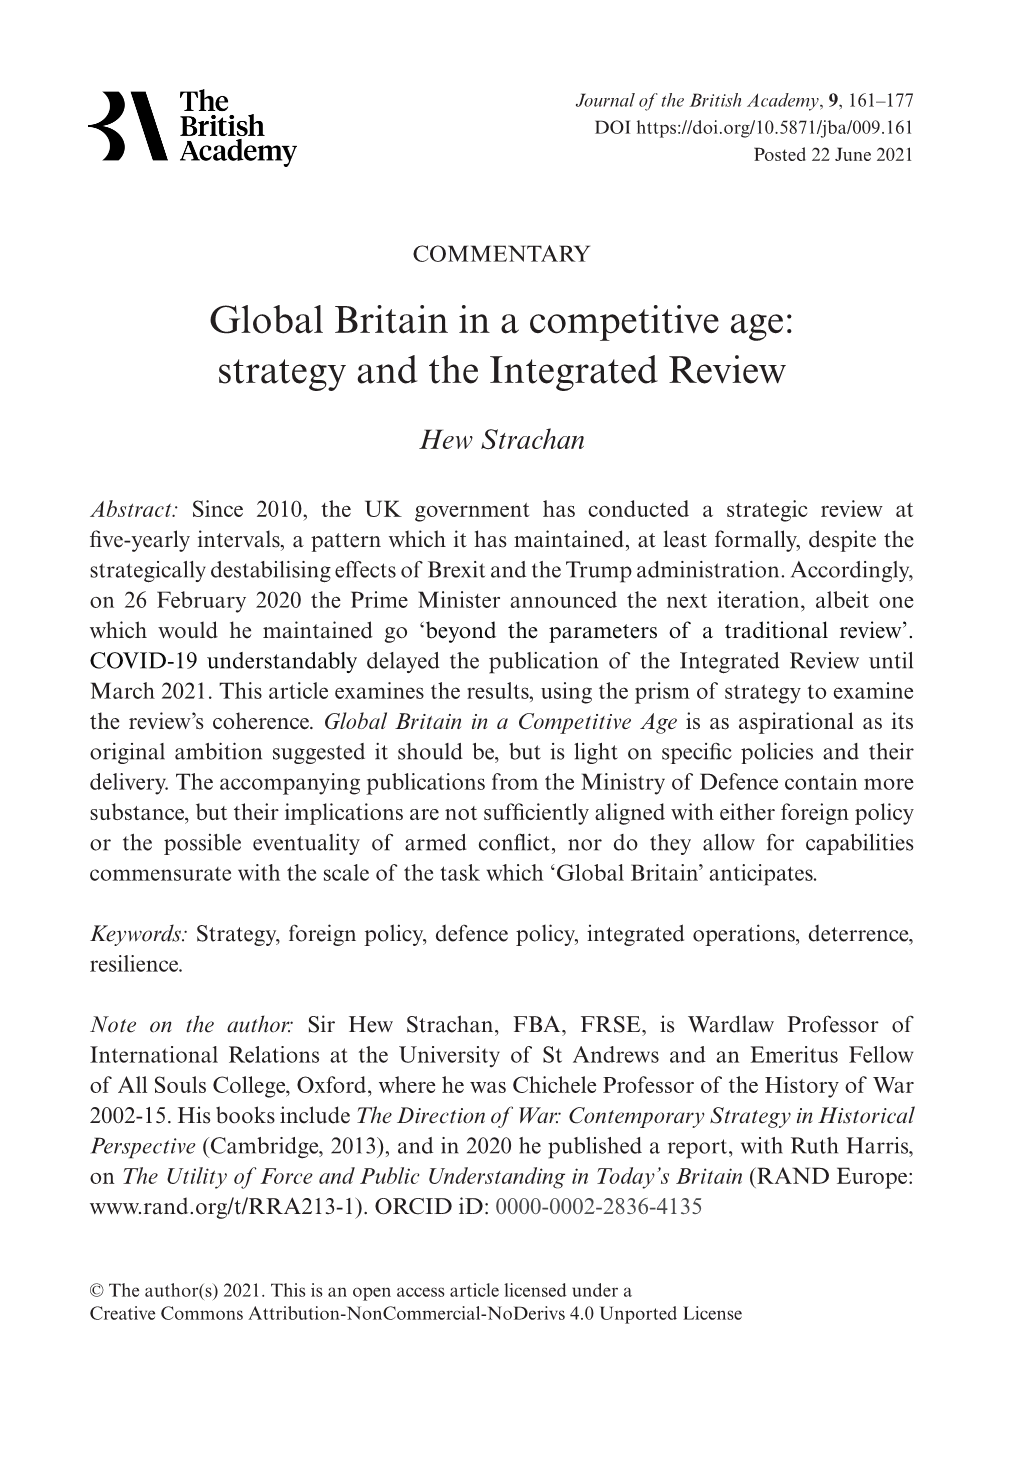 Global Britain in a Competitive Age: Strategy and the Integrated Review